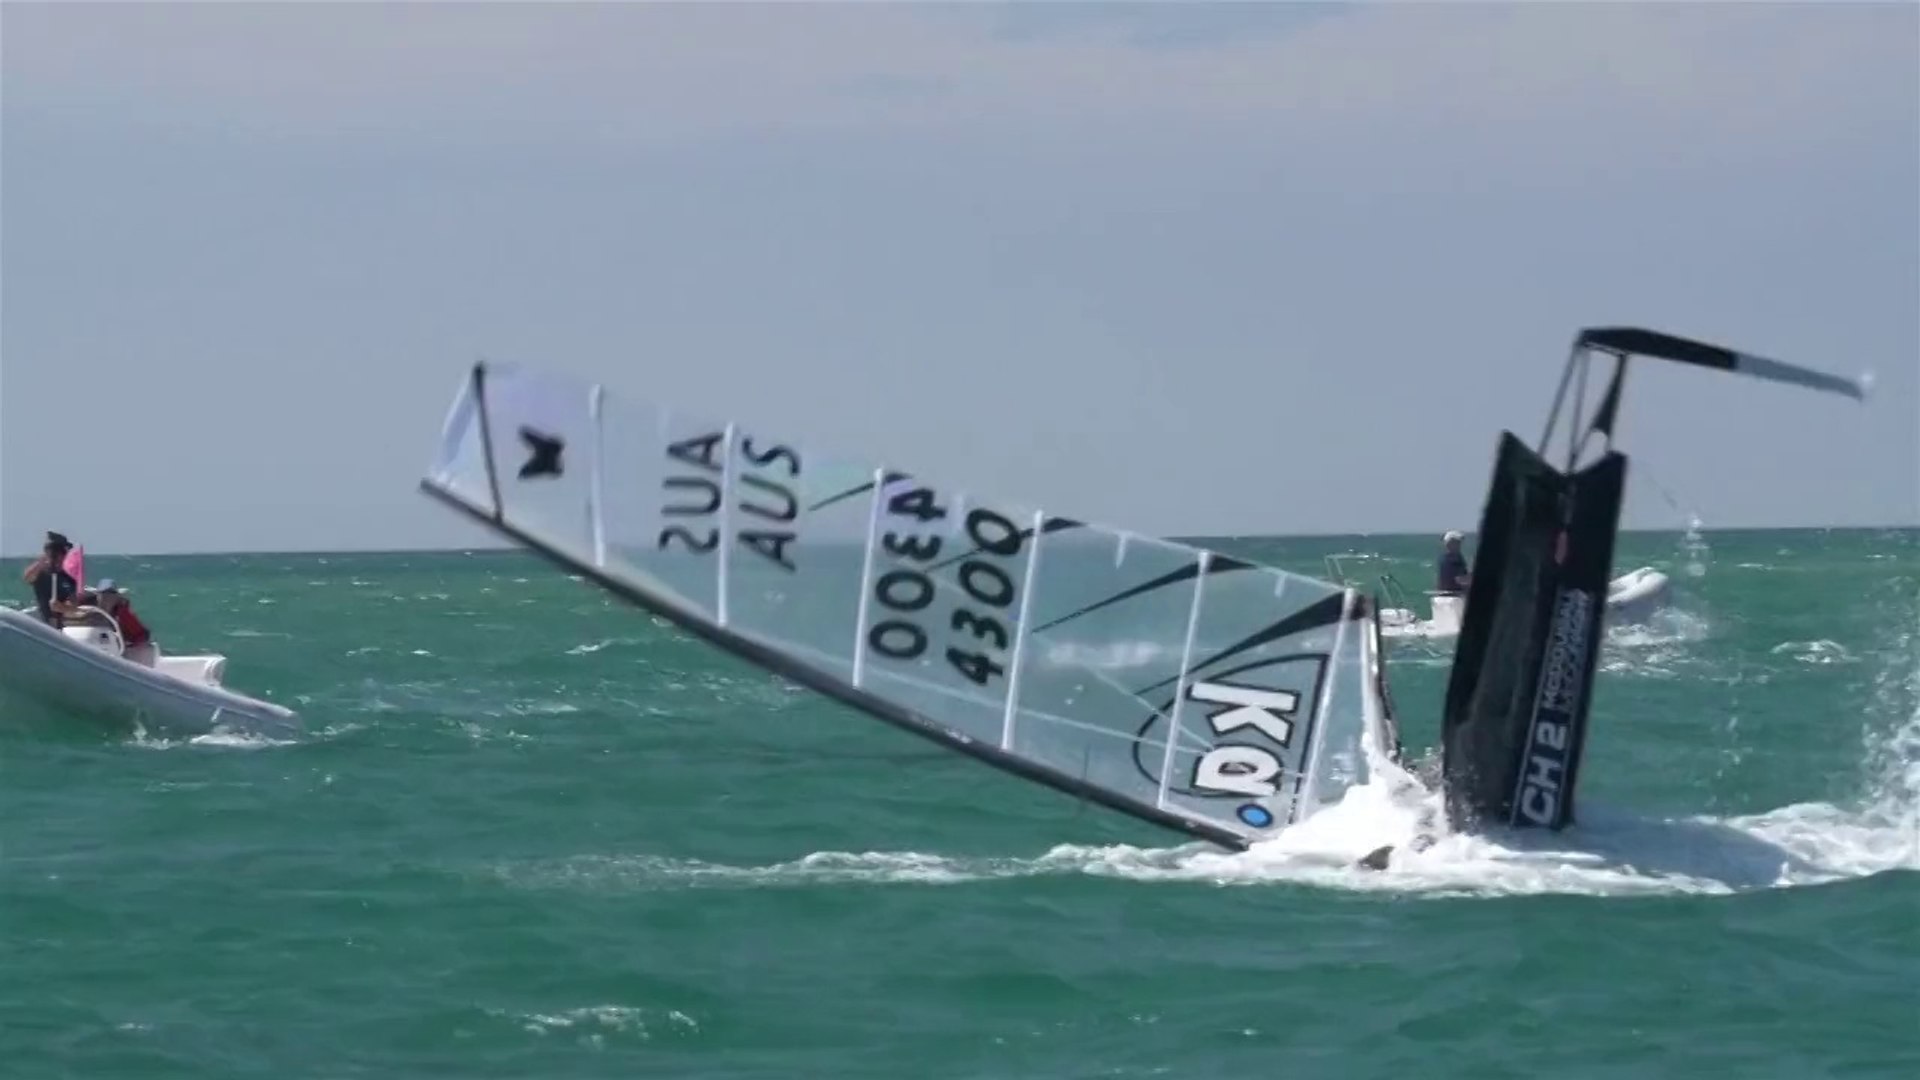 McDougall + McConaghy 2015 Moth Worlds - Jour 2